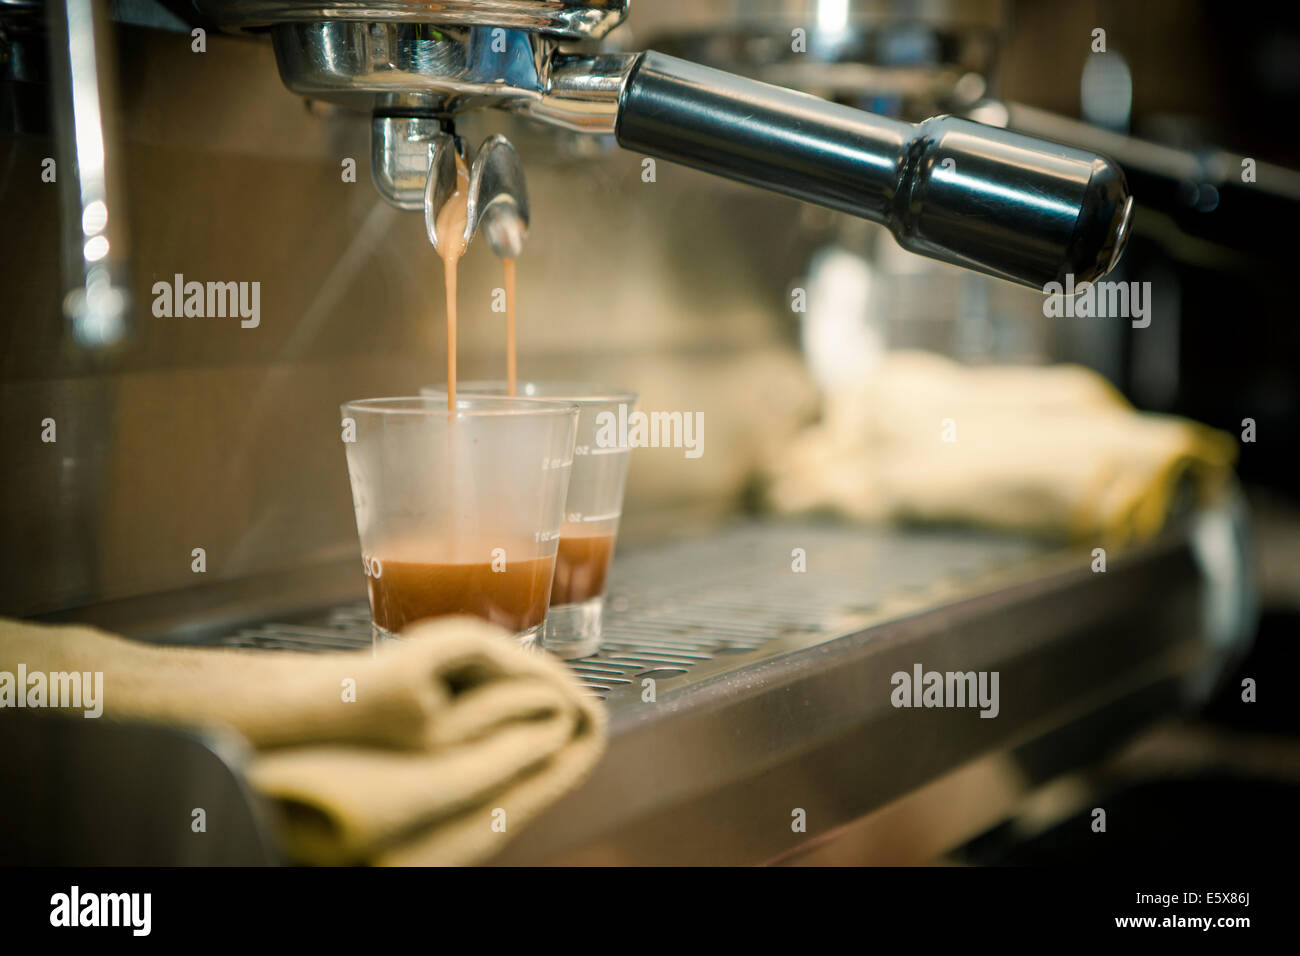 Close-up of espresso machine and shot glasses during a pour Stock